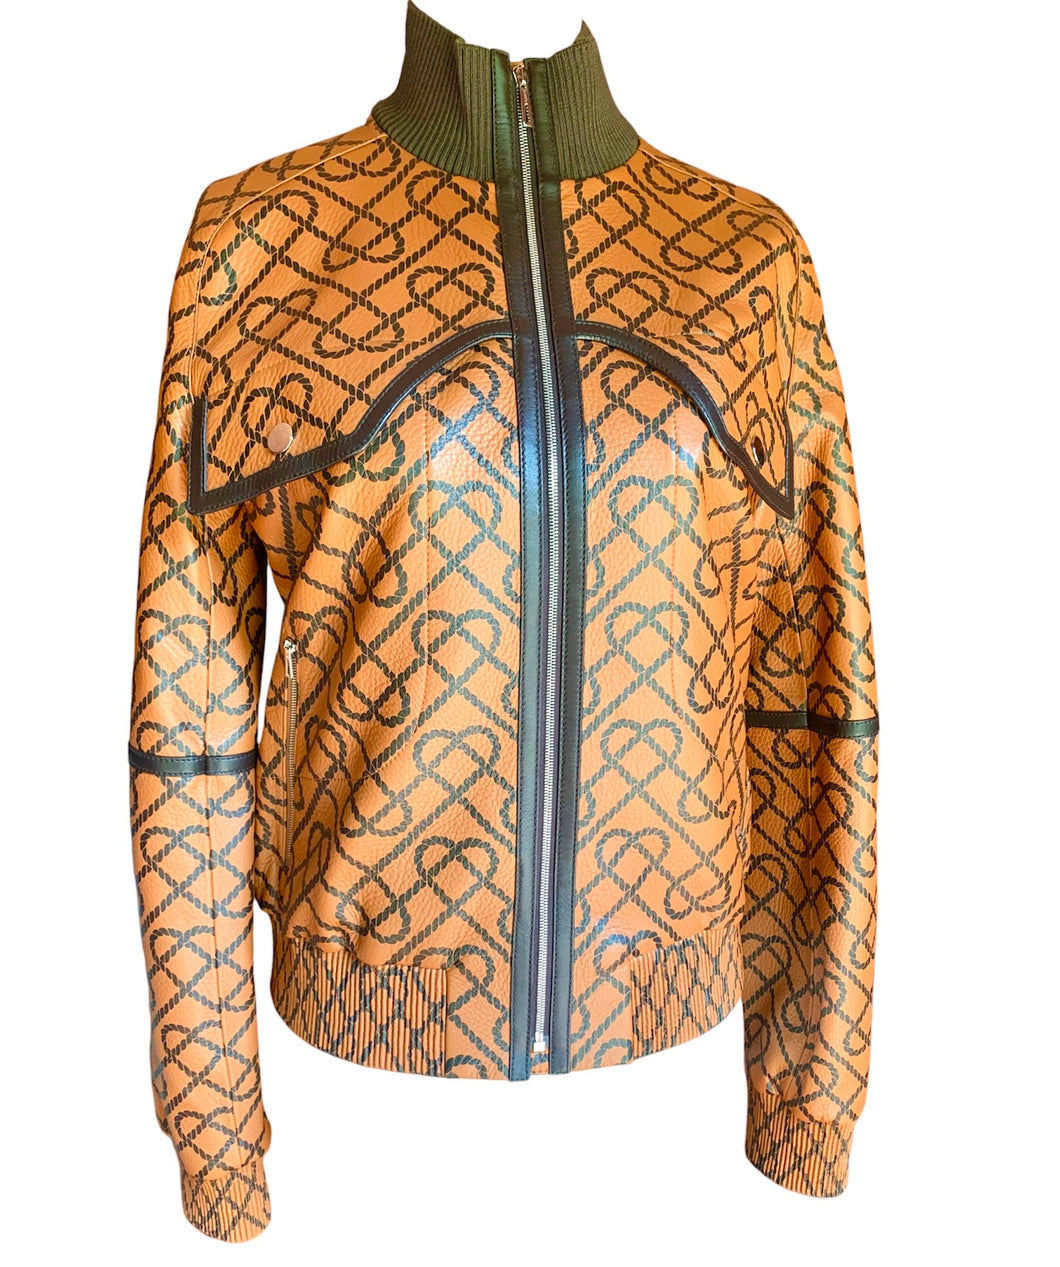 HERMES EQUESTRIAN PRINTED LEATHER BOMBER JACKET NEW